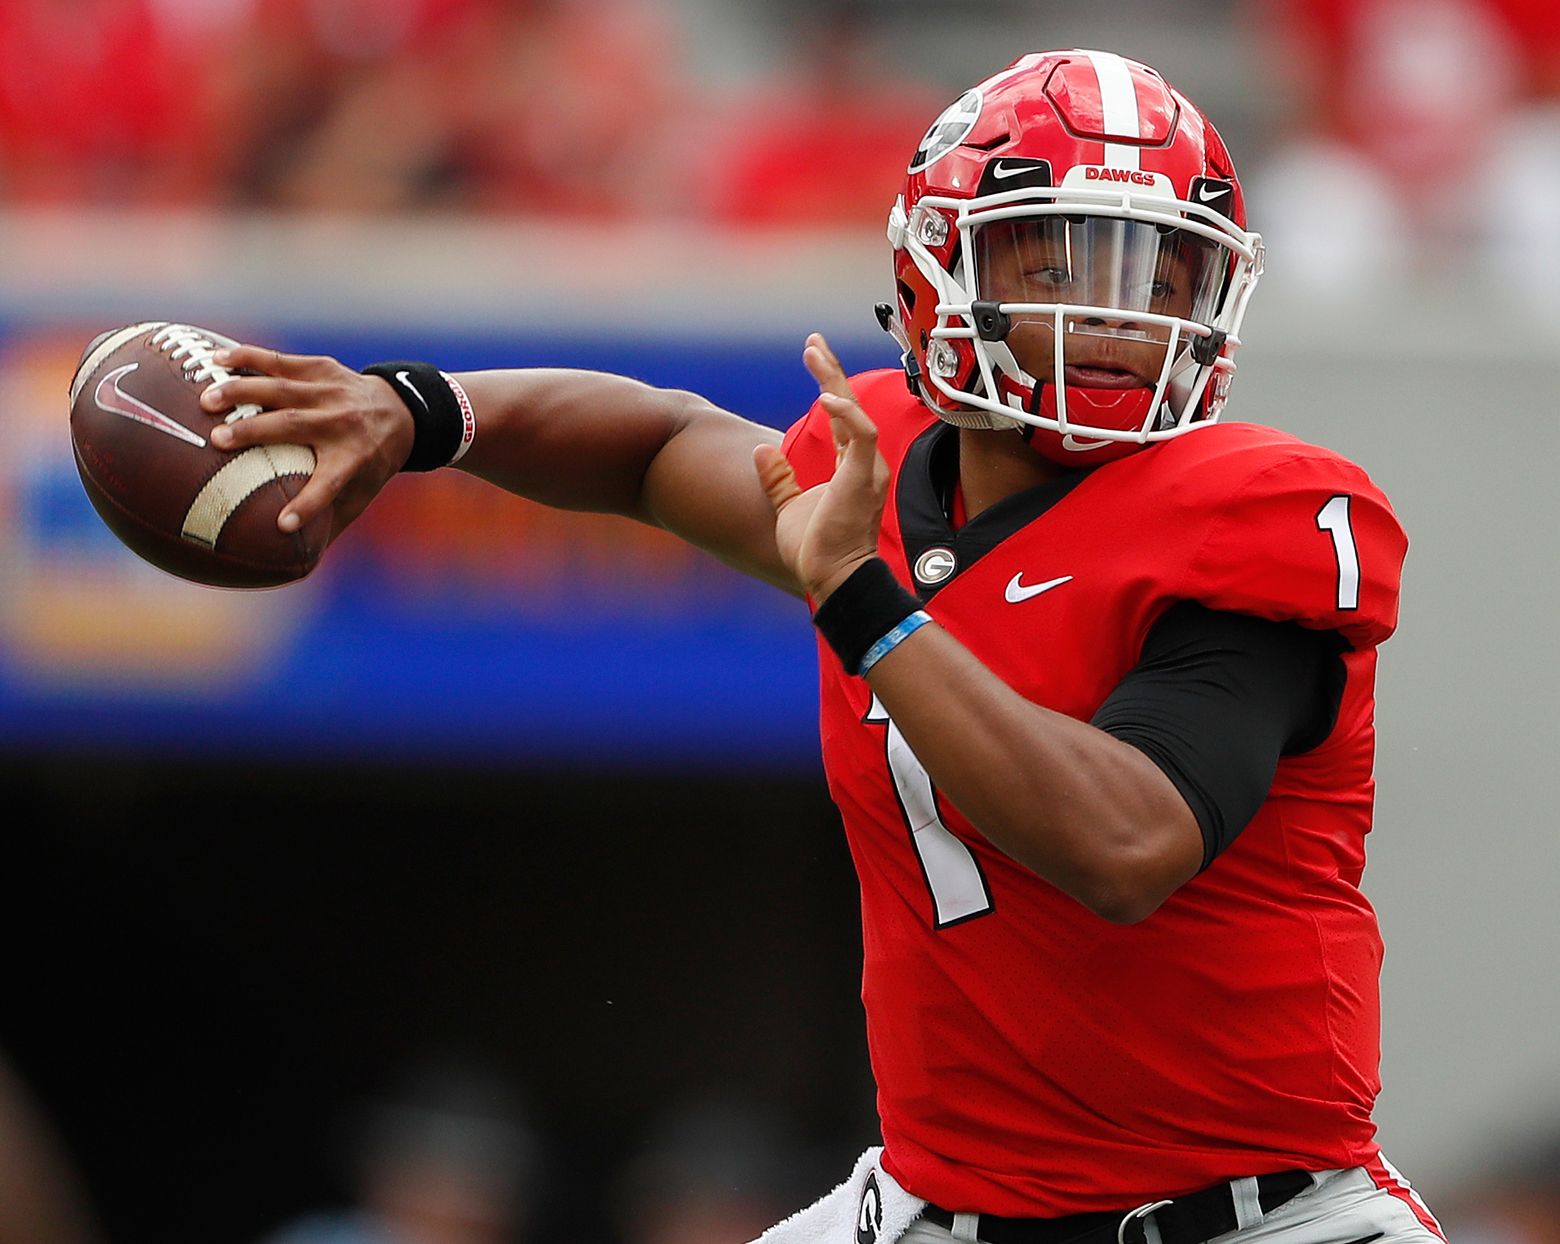 Ohio State QB Justin Fields finishes 7th in Heisman voting